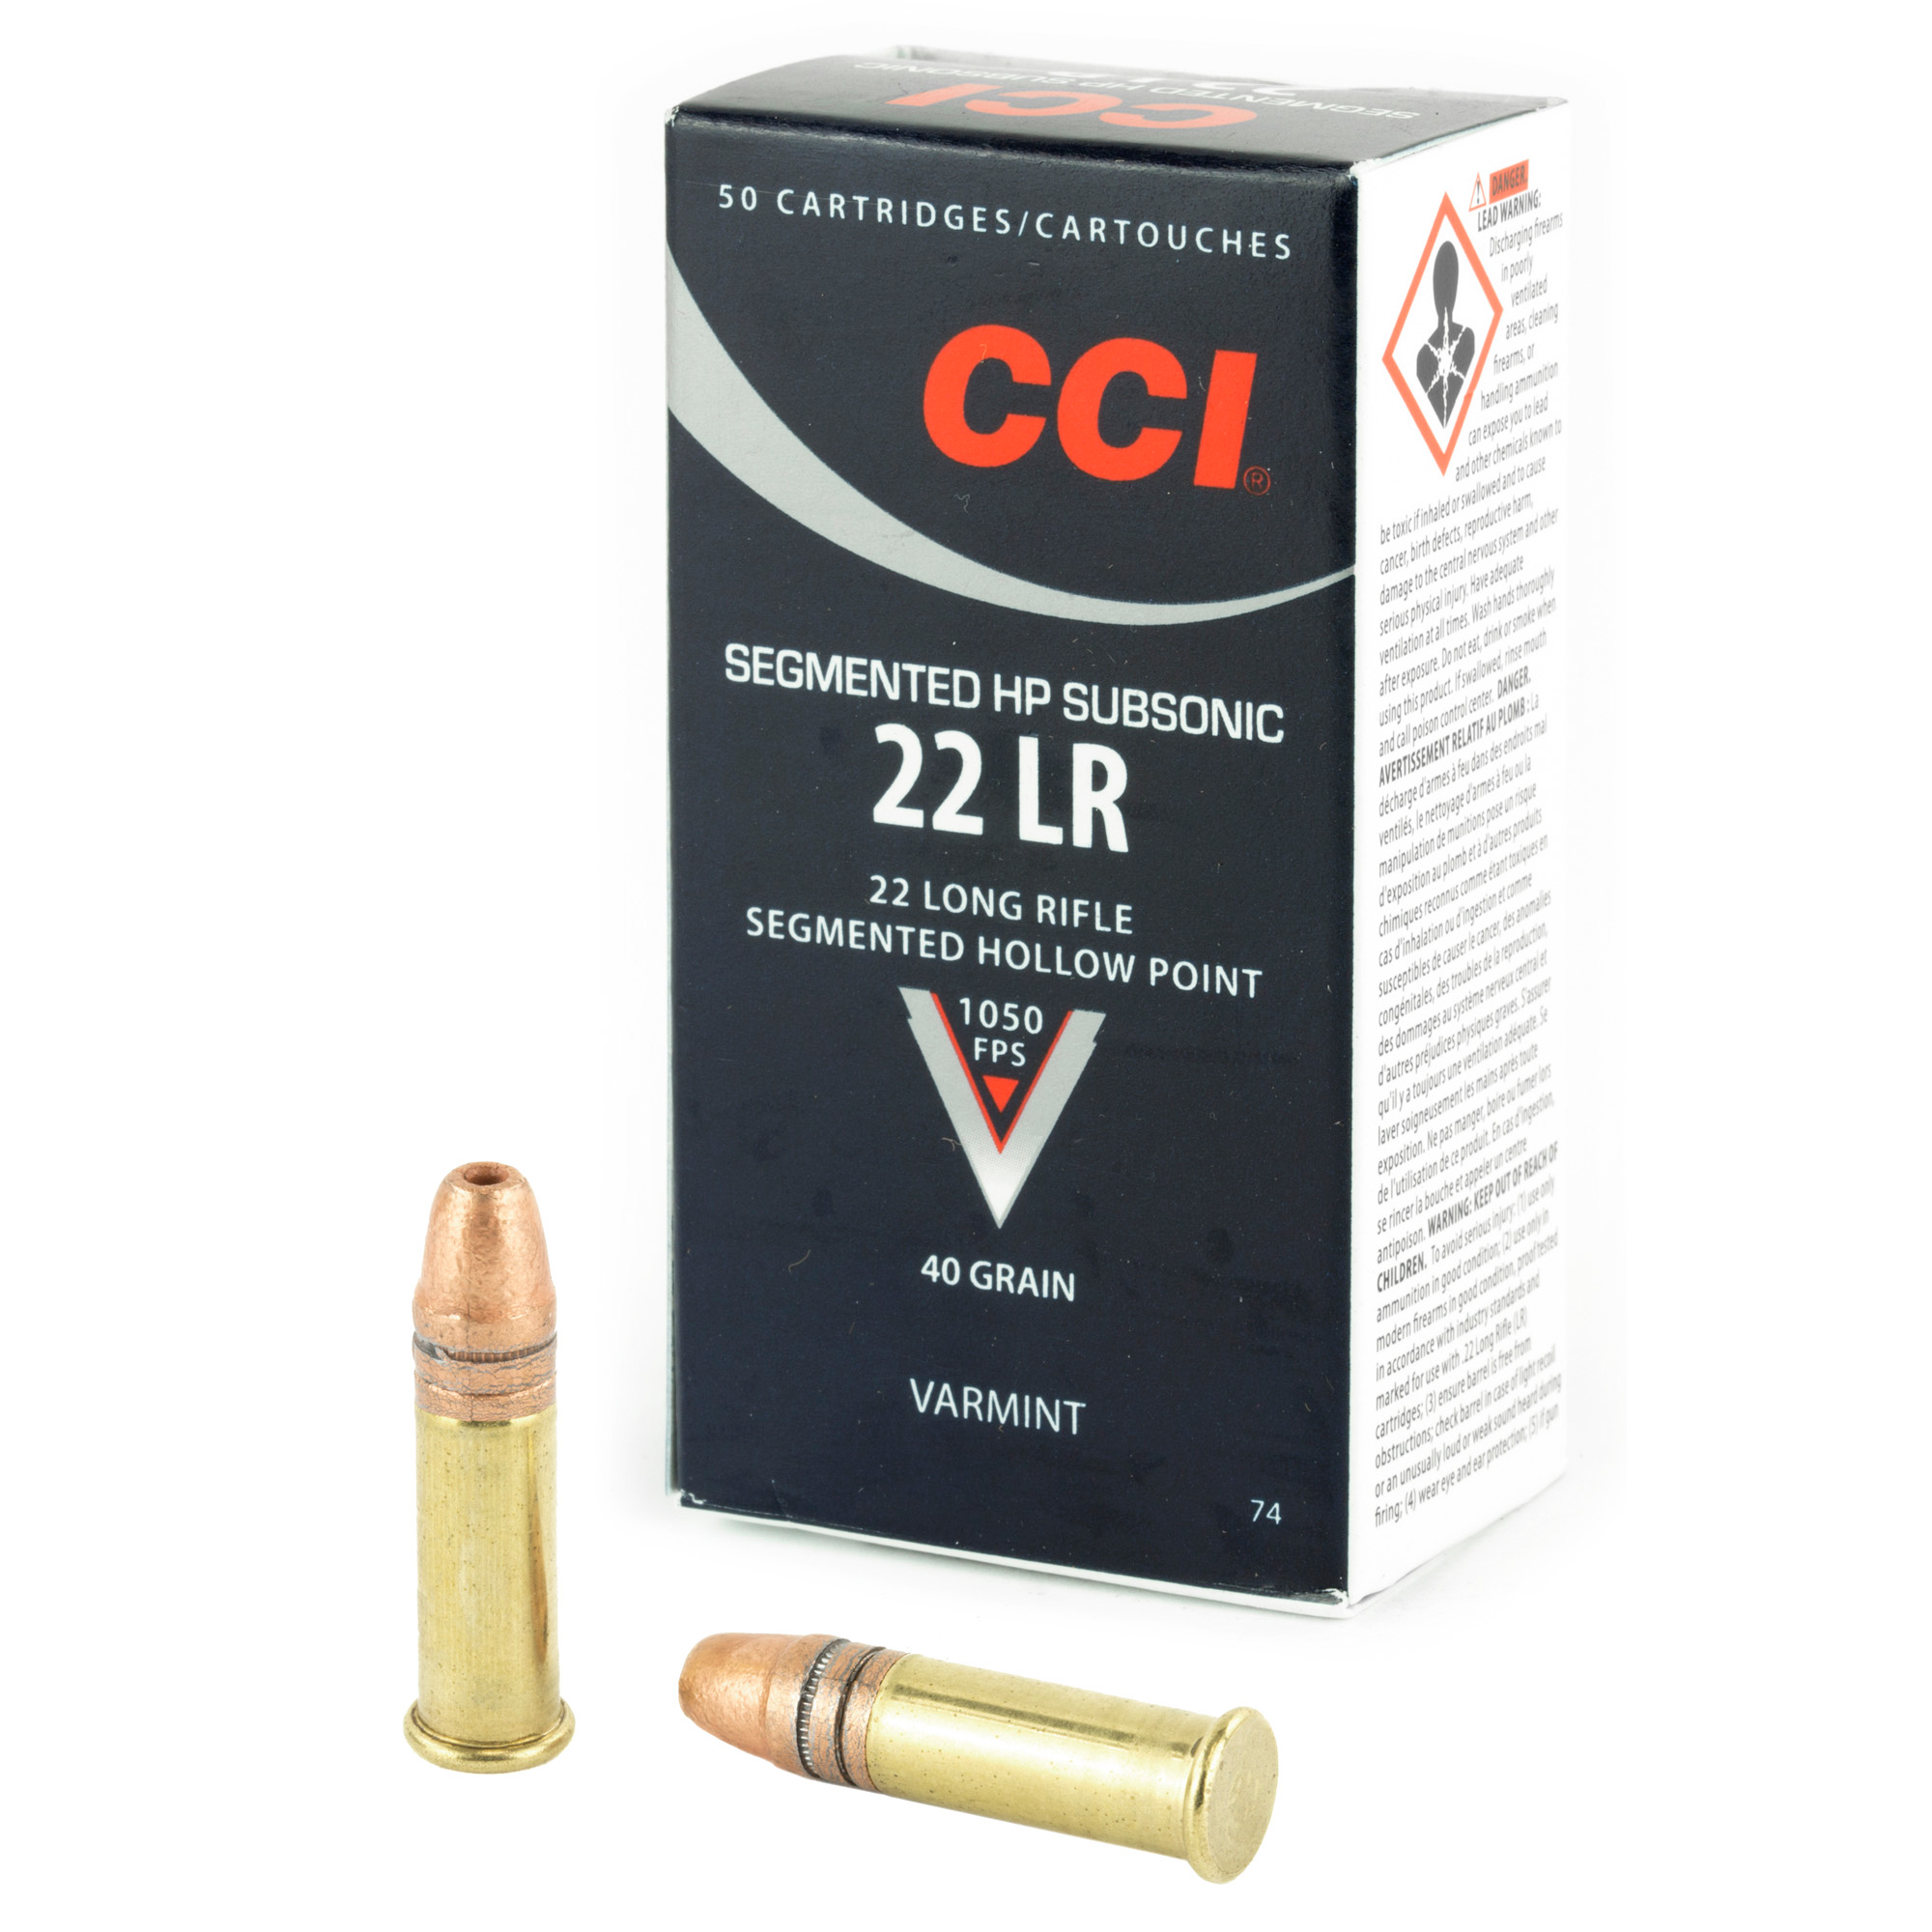 CCI Segmented CPS Subsonic HP Ammo